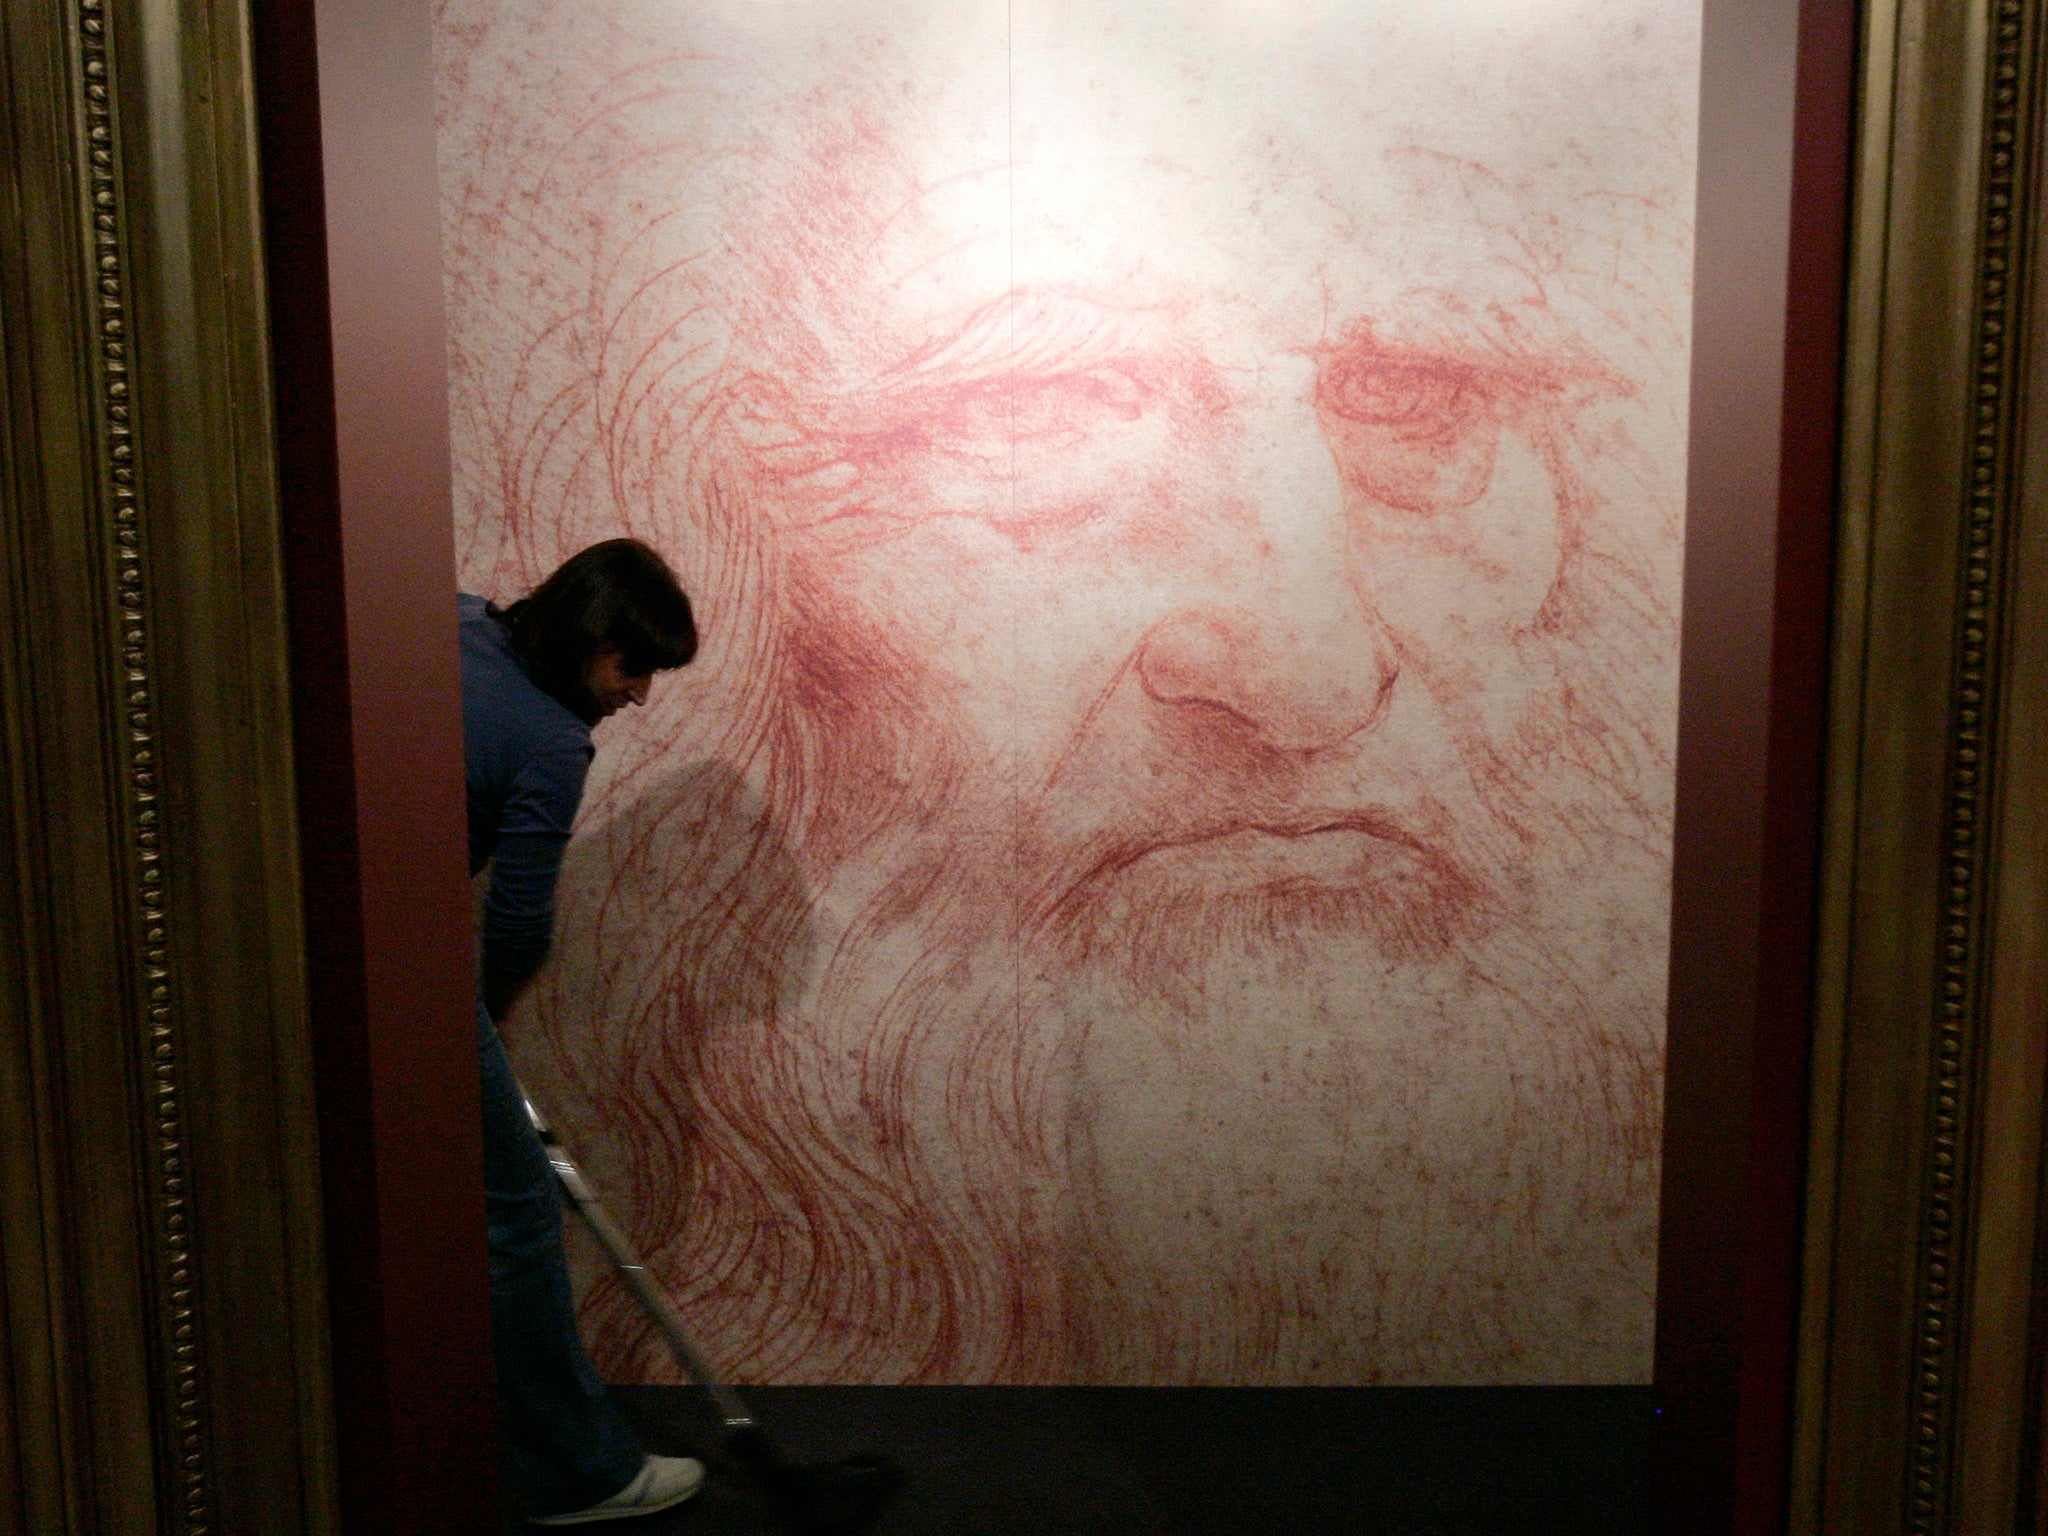 A cleaner vacuums in front of a Leonardo da Vinci self-portrait drawn around 1515 or 1516 at an exhibition in Brussels